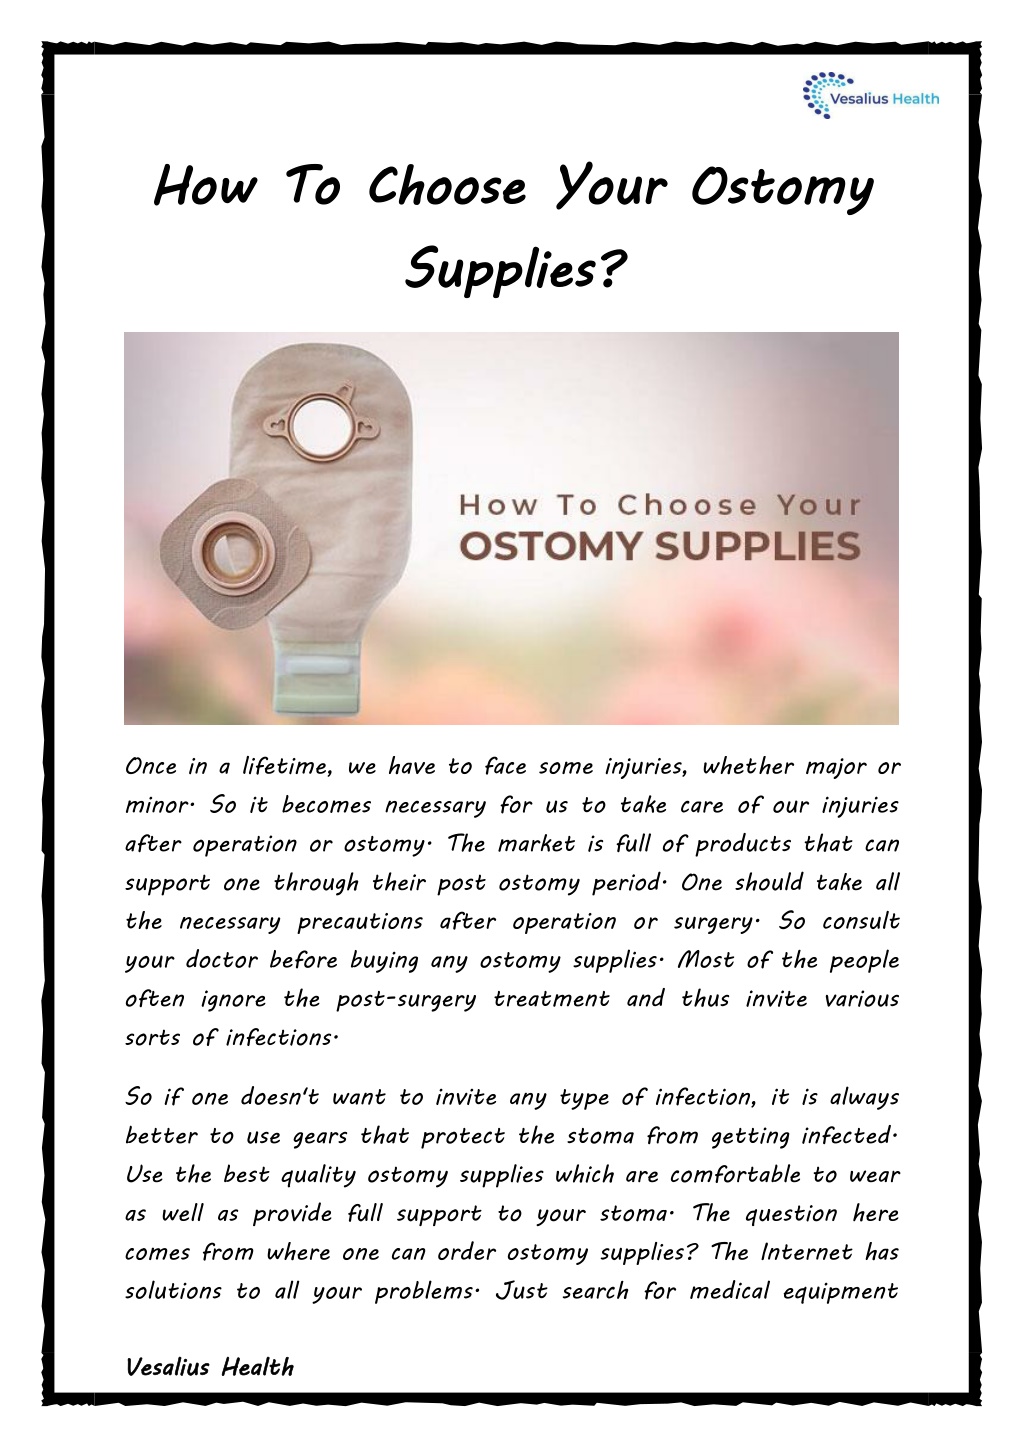 PPT - How To Choose Your Ostomy Supplies? PowerPoint Presentation